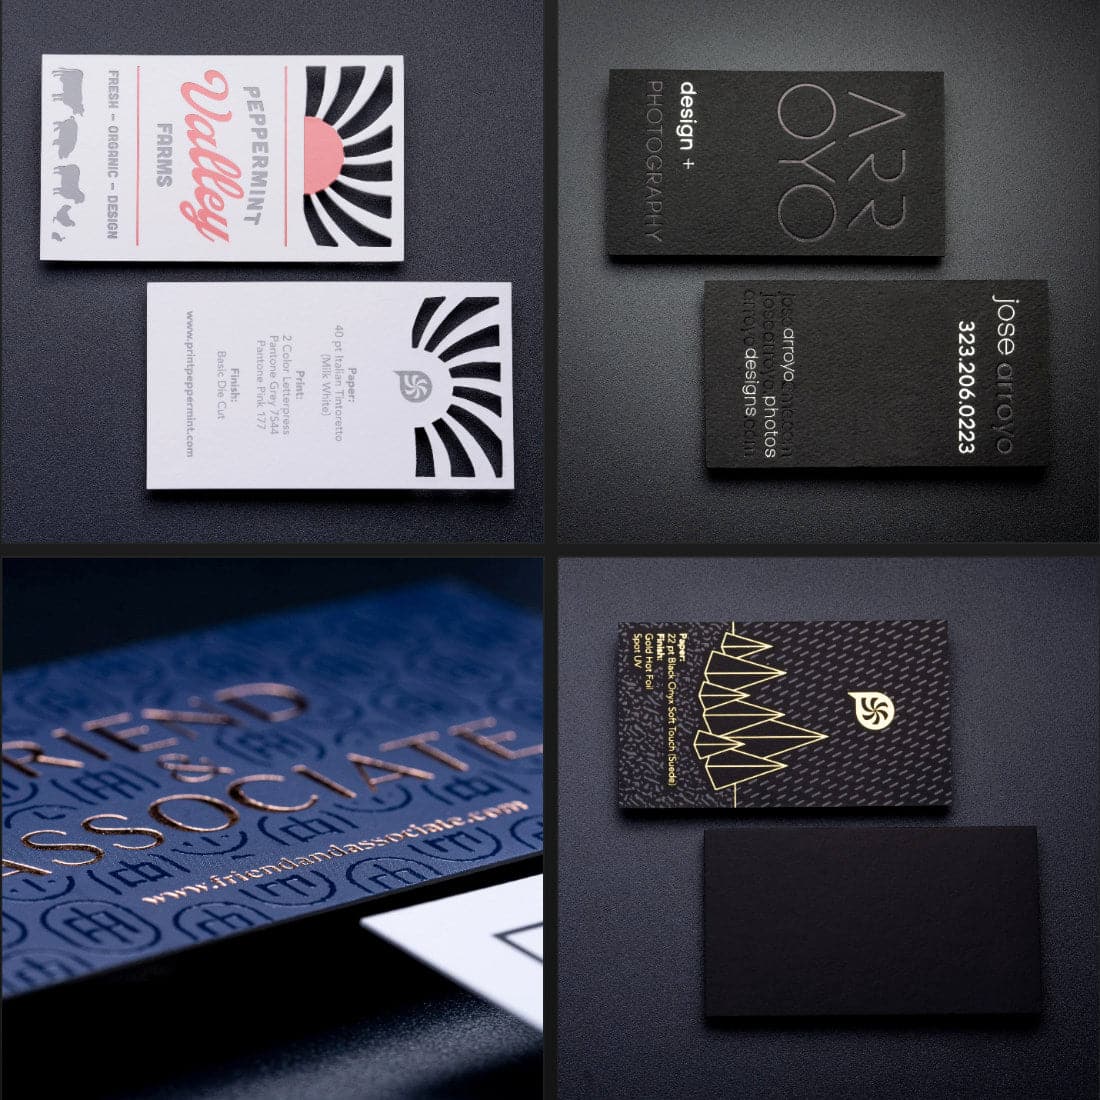 Folded Business Cards - Print Business Cards with Twice the Space